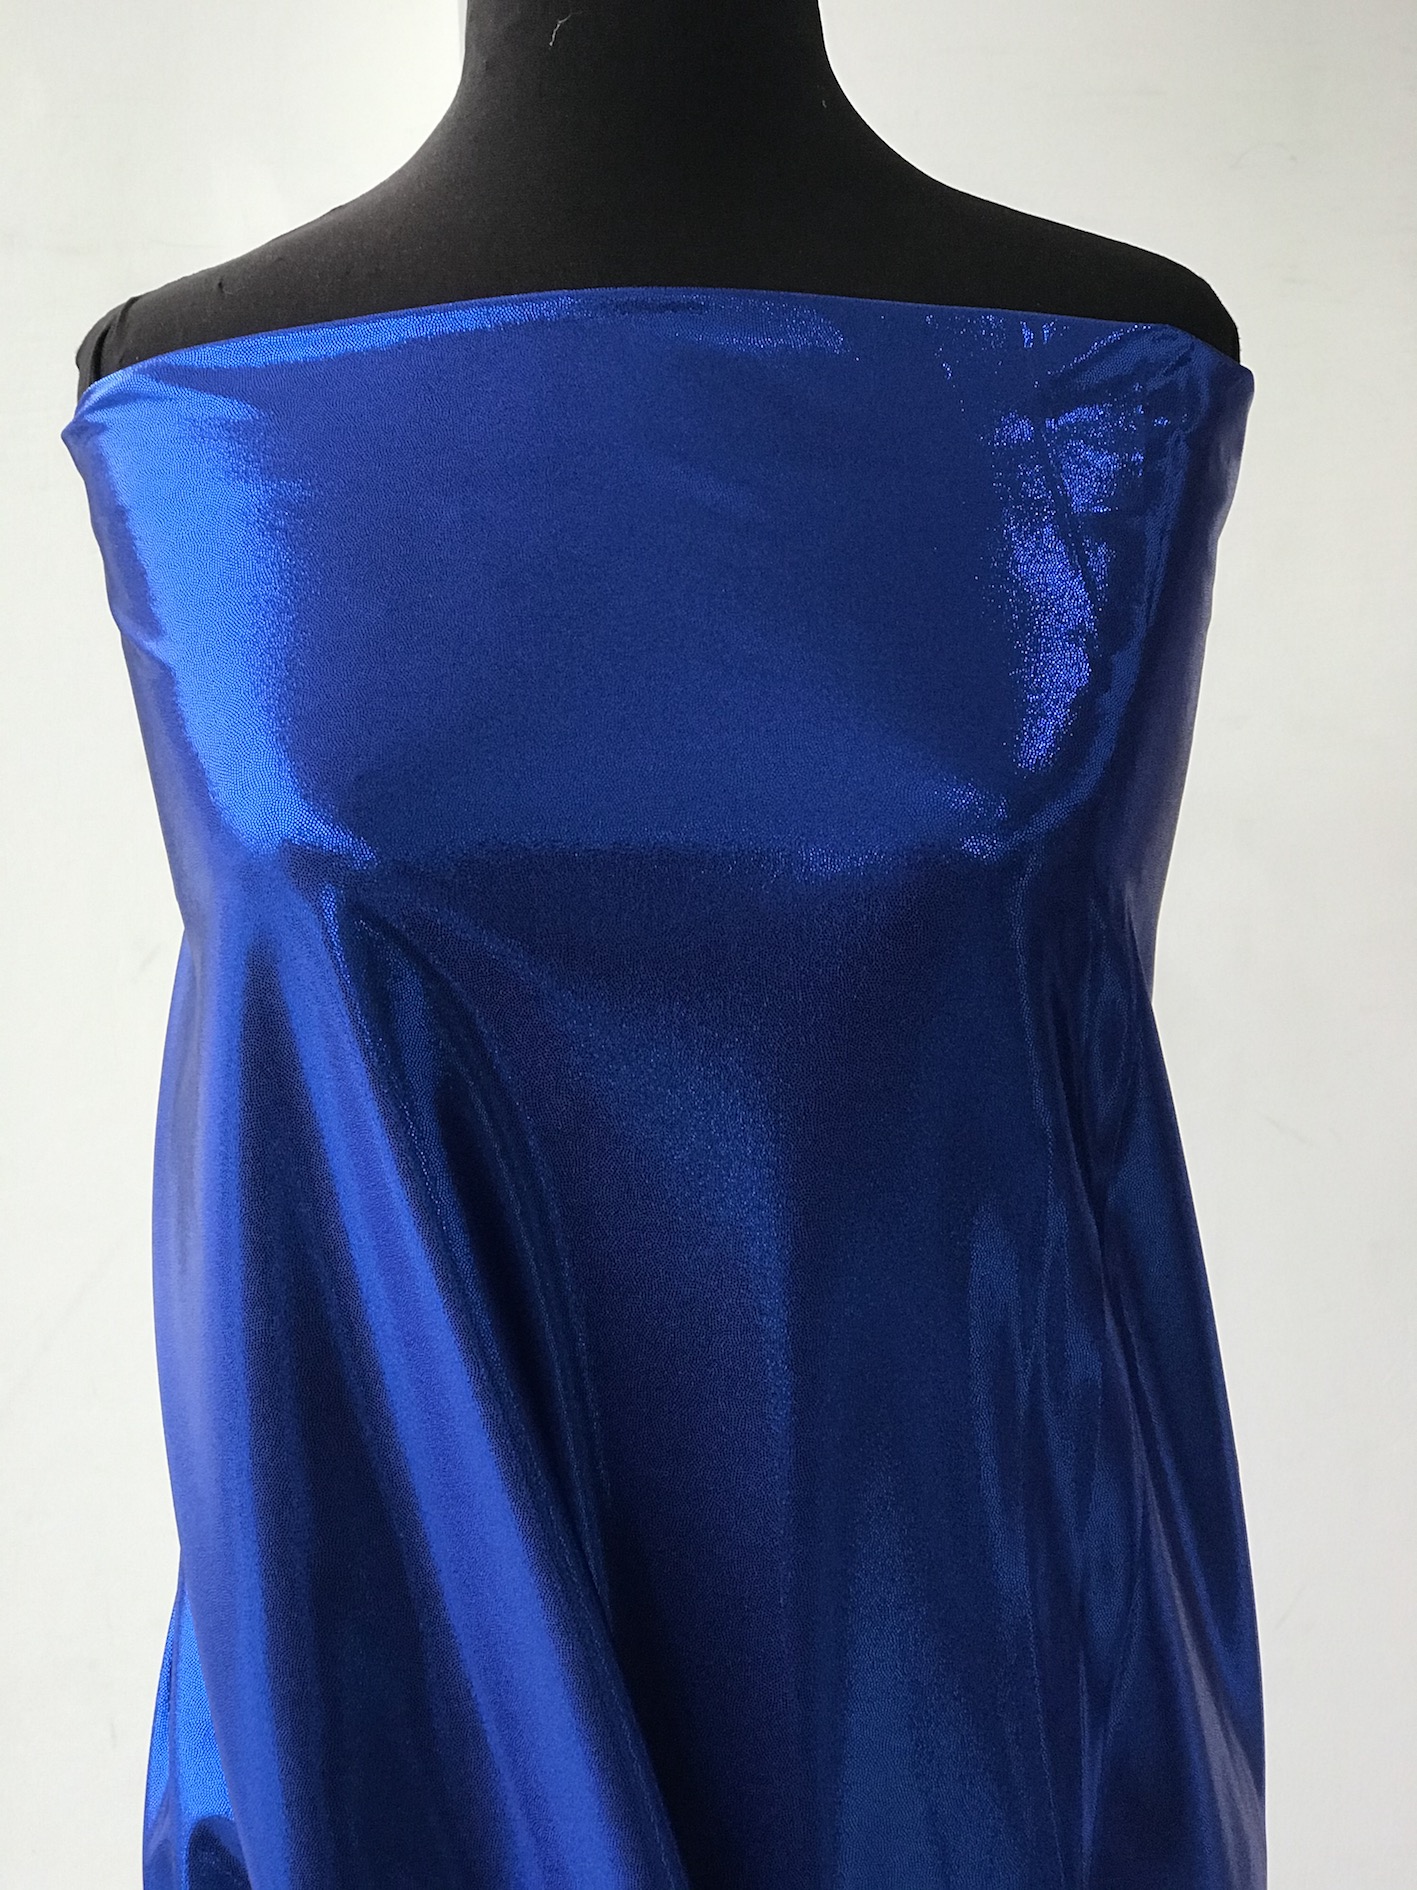 Job lot of Metallic foils parties & festival costumes 4 way stretch lycra blue green Perfect for dance wear red and blurple